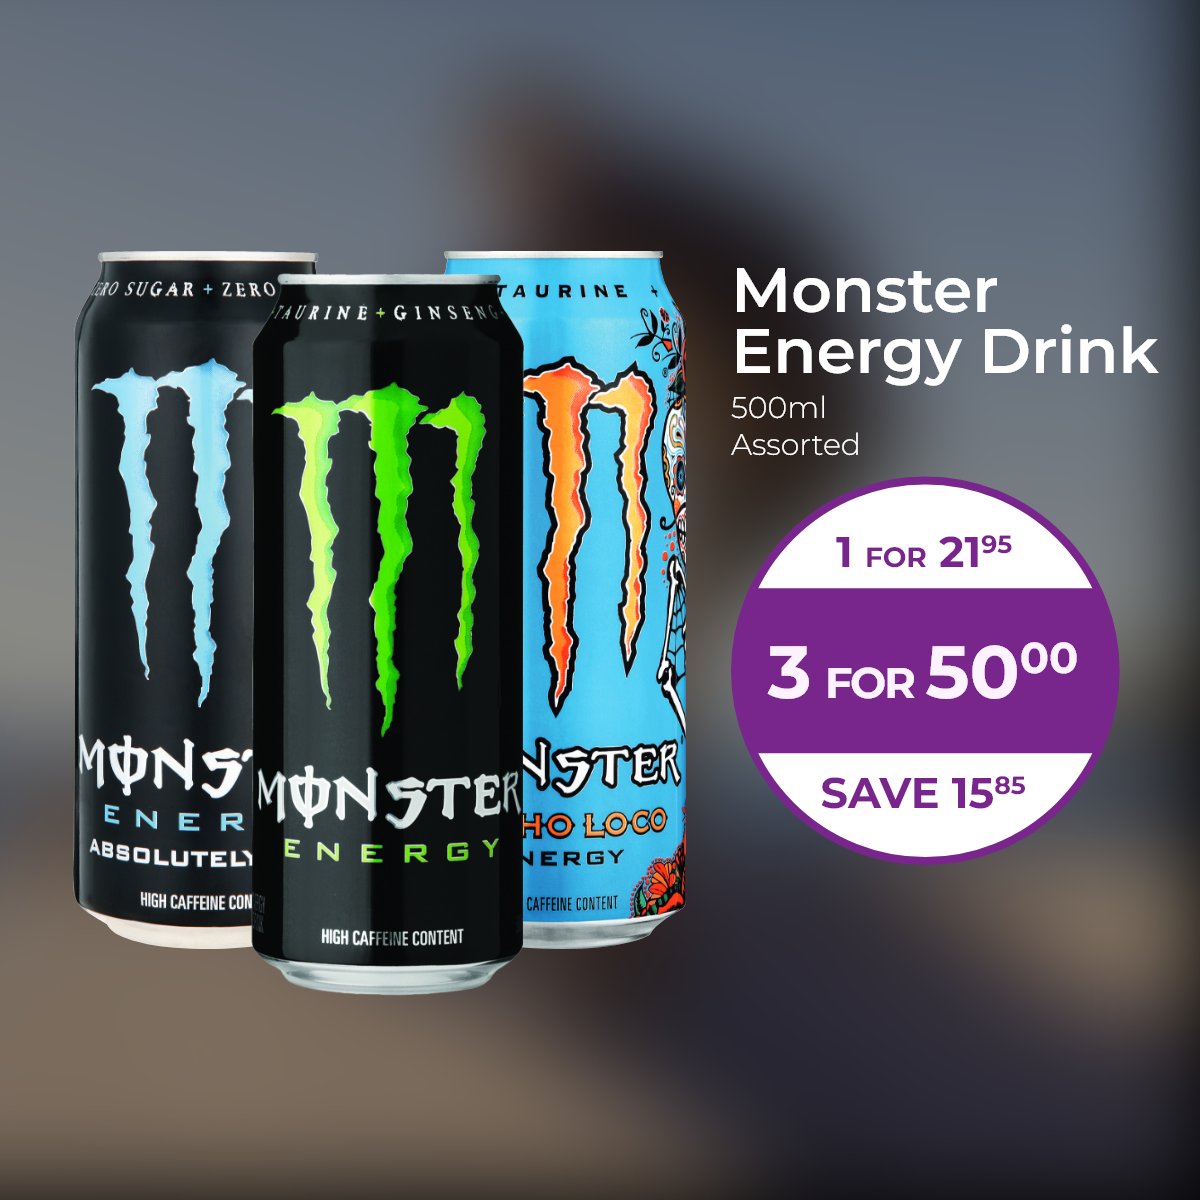 Get up and get going with deals on energy drinks! Get yours now: bit.ly/4dbs8Kq Offer valid until 12 May 2024. #Monster #EnergyDrink #DisChem